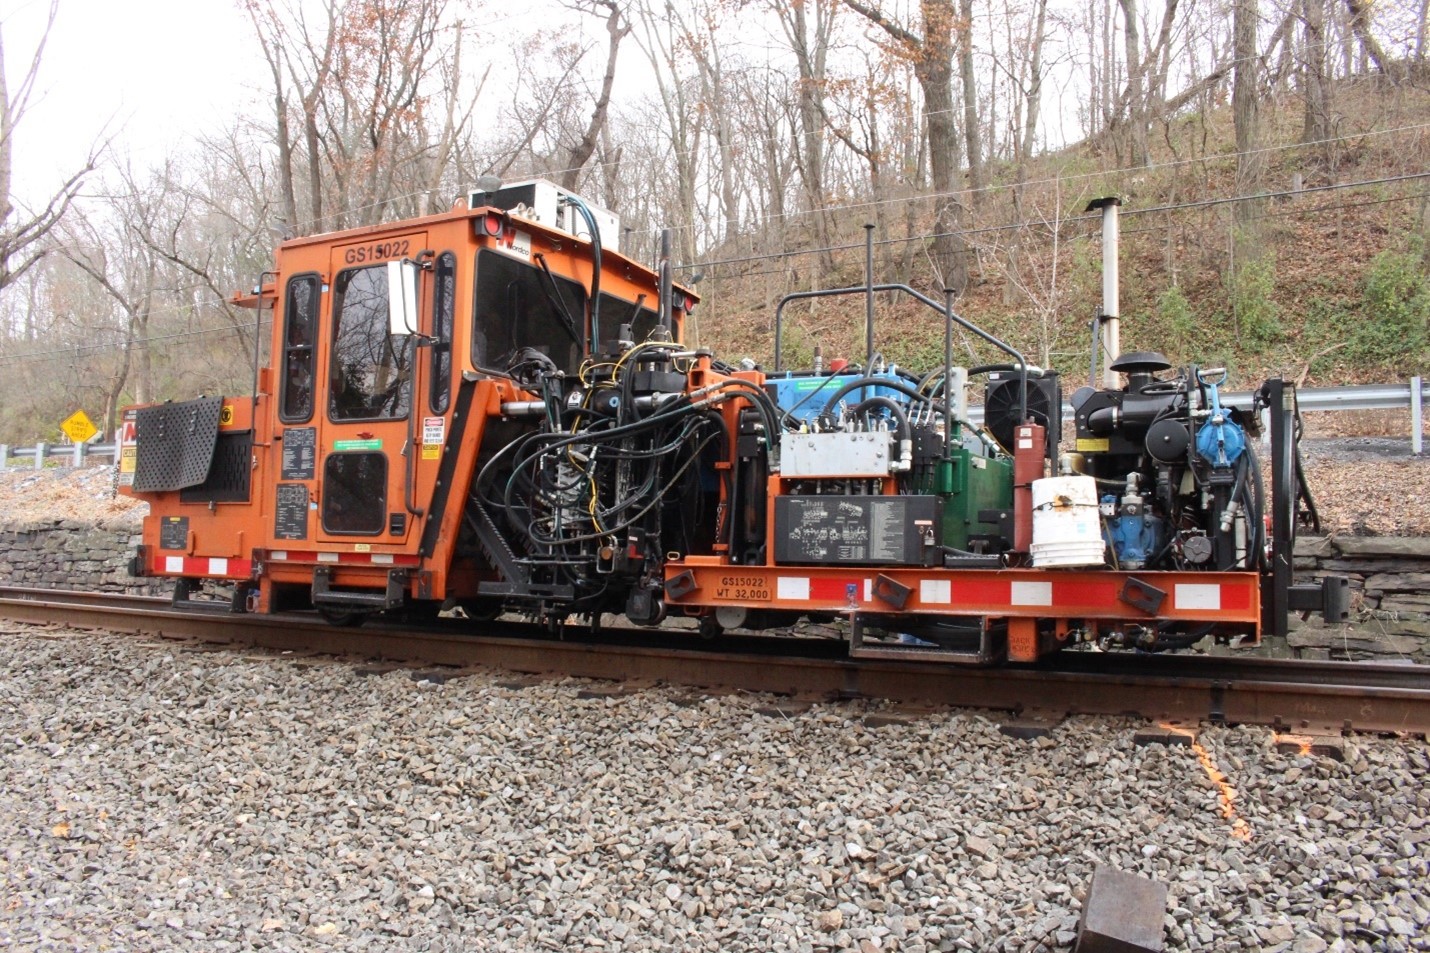 Photo of Spike machine involved in the accident